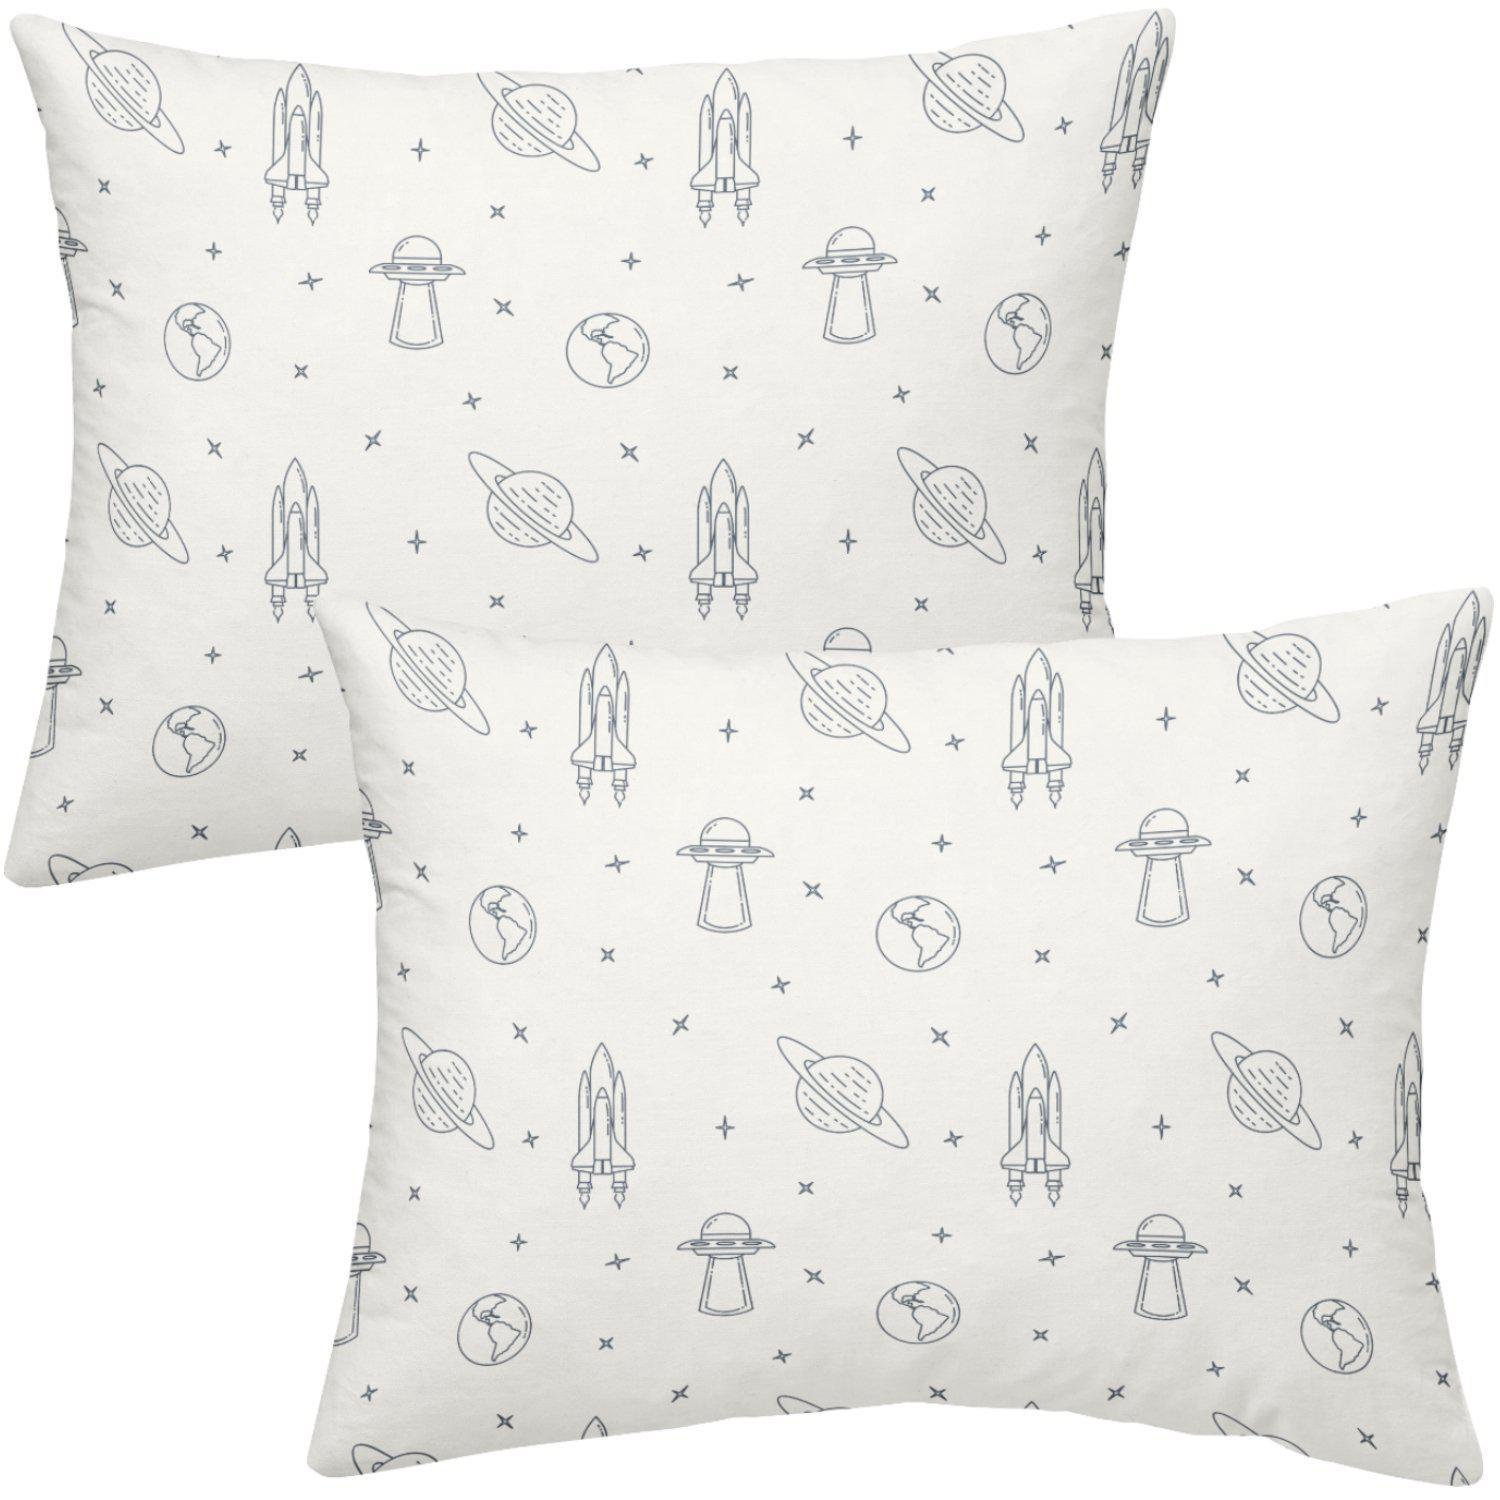 Two square pillows with a space-themed pattern featuring sketches of planets, UFOs, and spaceships on a light grey background - Makemake Organics Organic Cotton Toddler Pillowcase in Celestial.